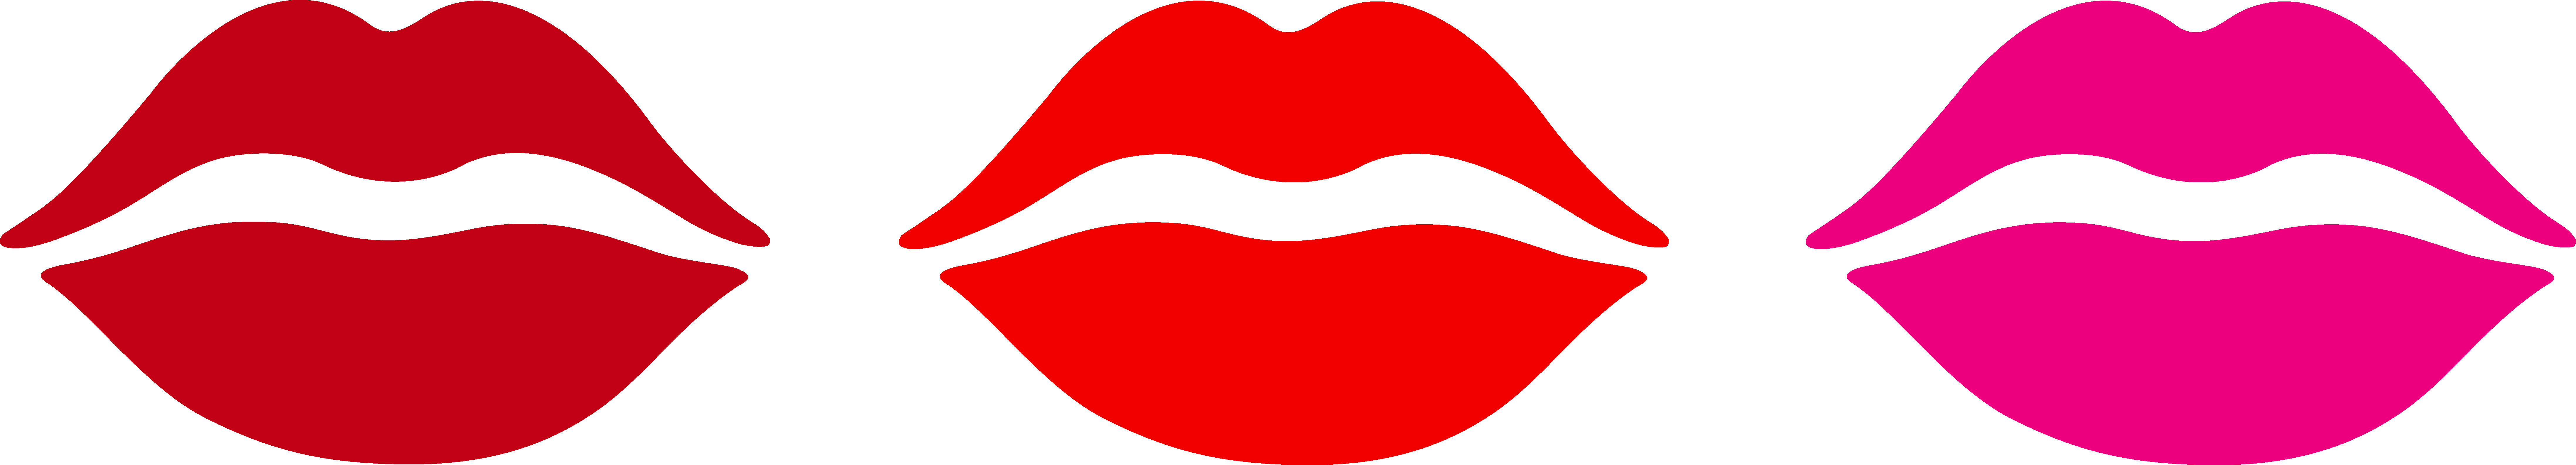 Pictures Of Cartoon Lips | Free Download Clip Art | Free Clip Art ...